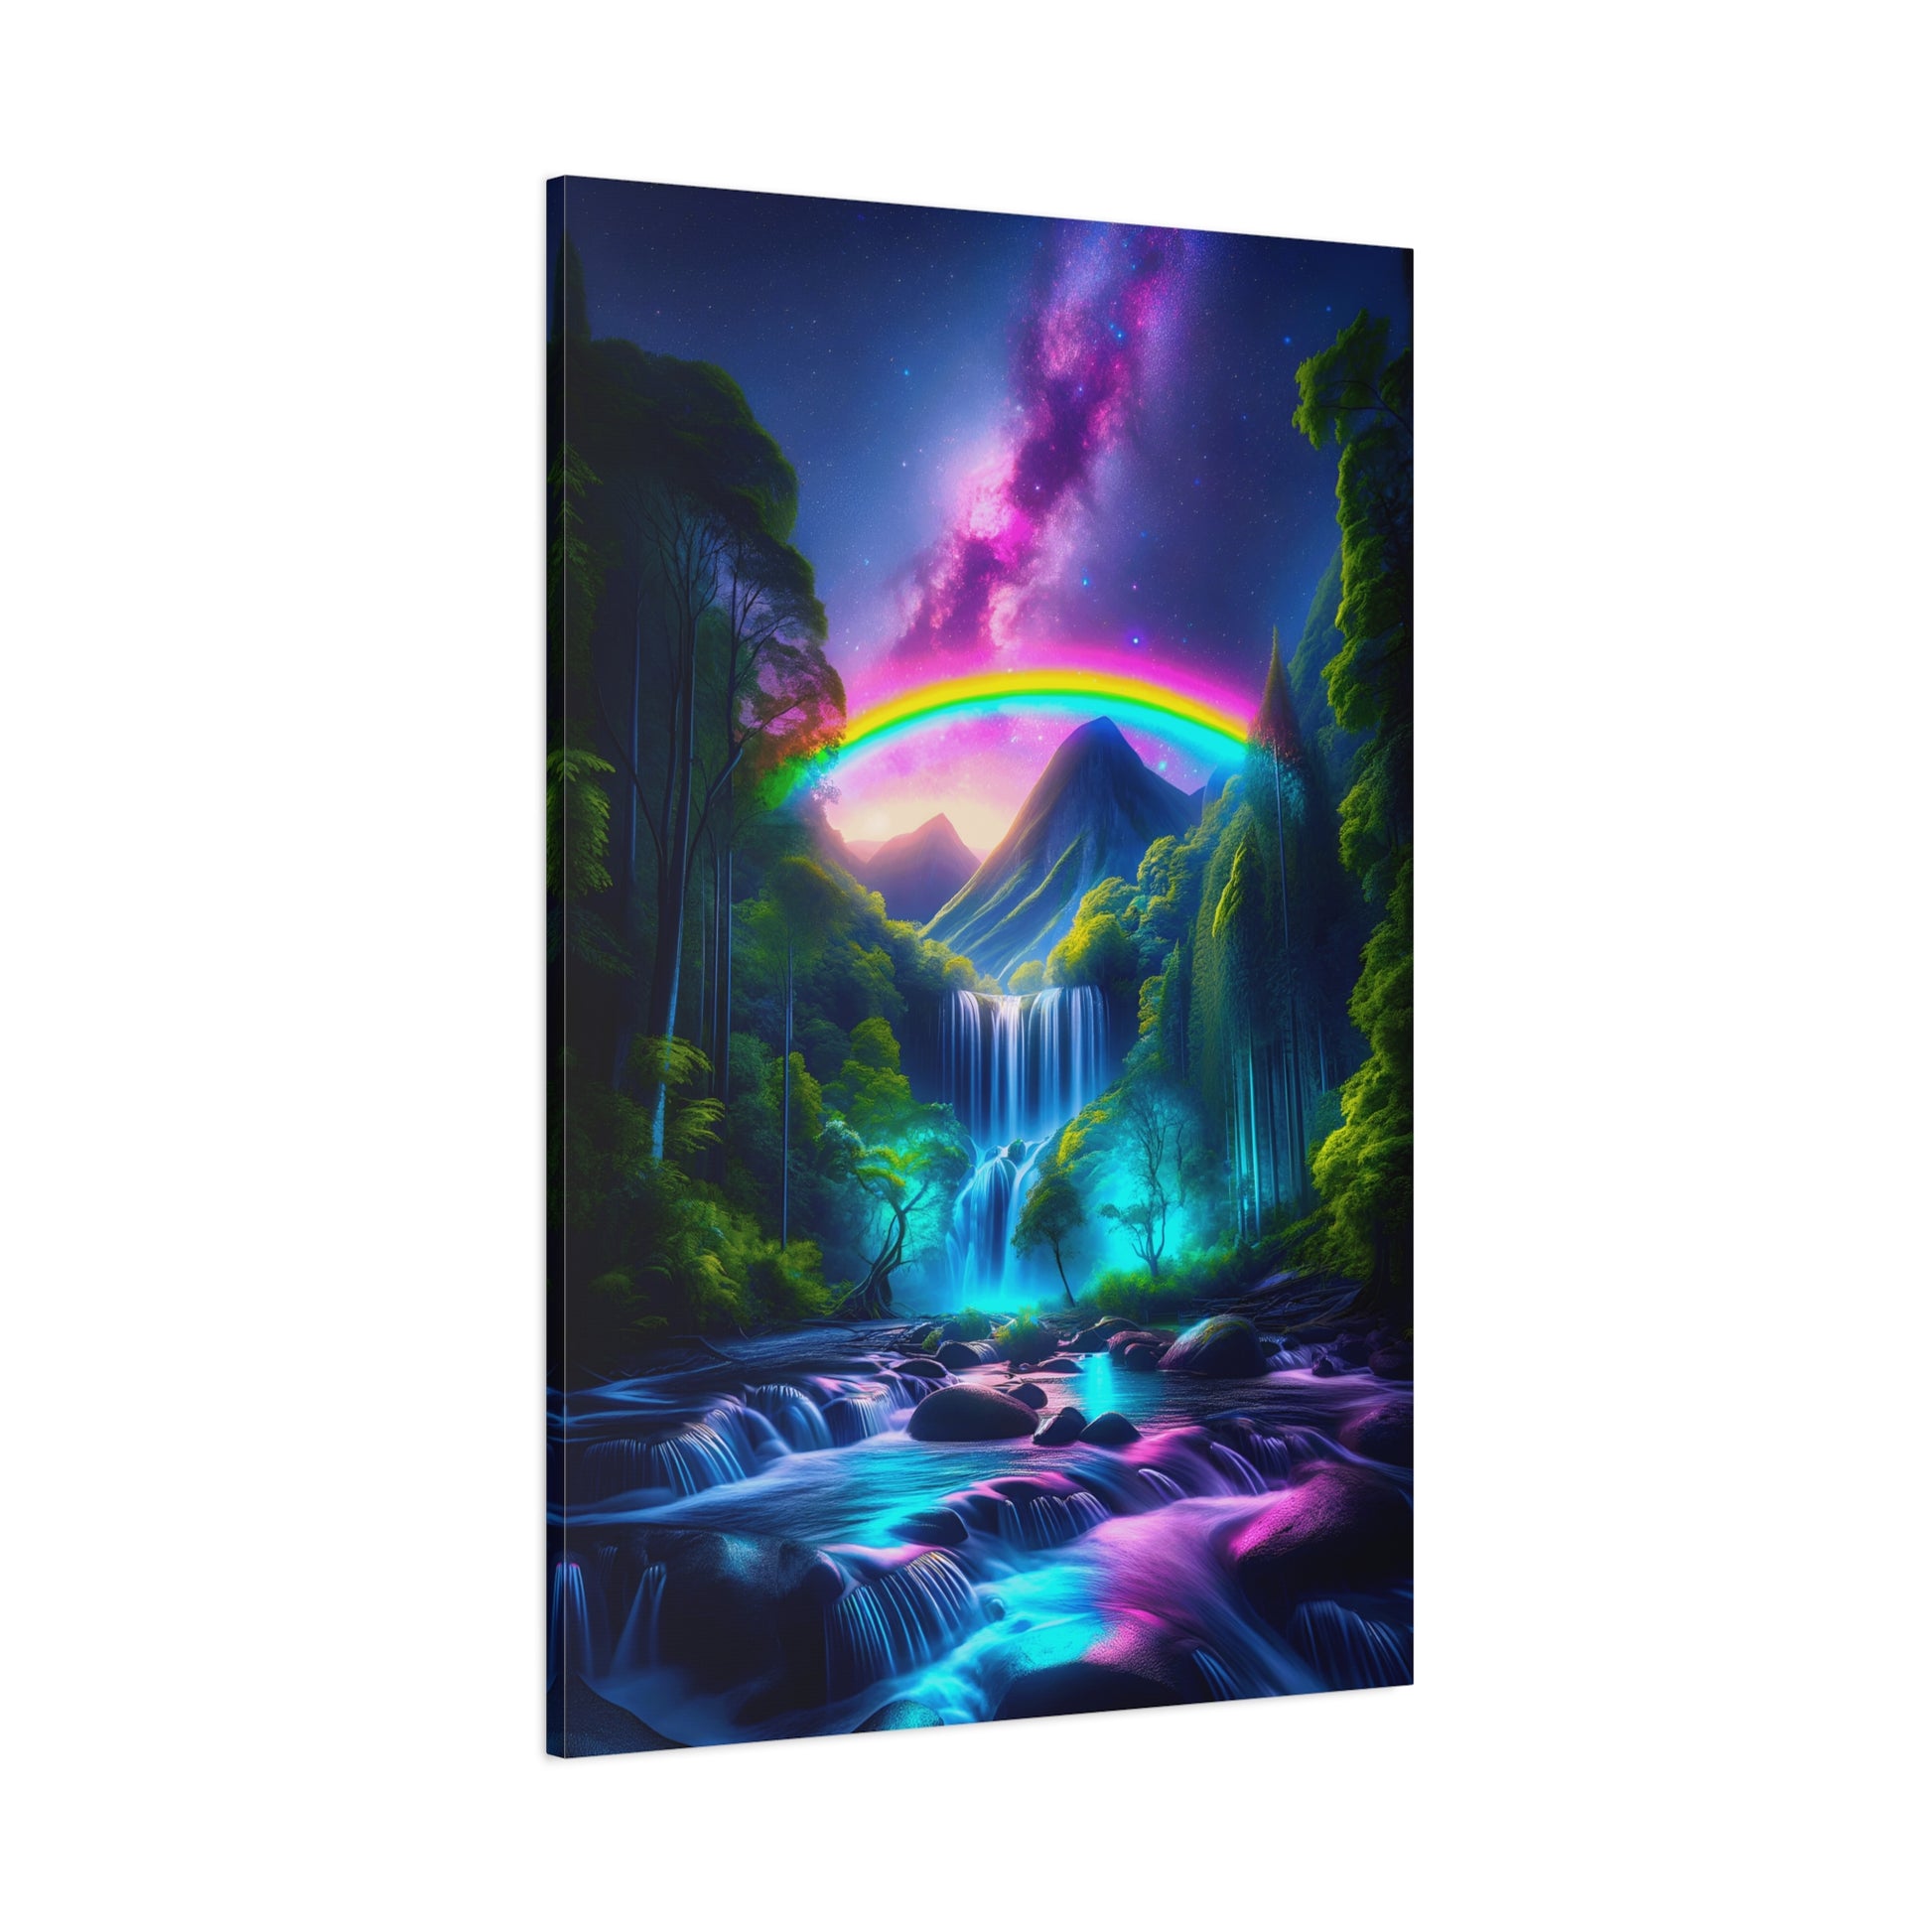 Galactic Falls (Canvas)Galactic Falls (Canvas  Matte finish, stretched, with a depth of 1.25 inches)
Make an art statement with RimaGallery's responsibly made canvases. Eco-friendly cottonRimaGallery